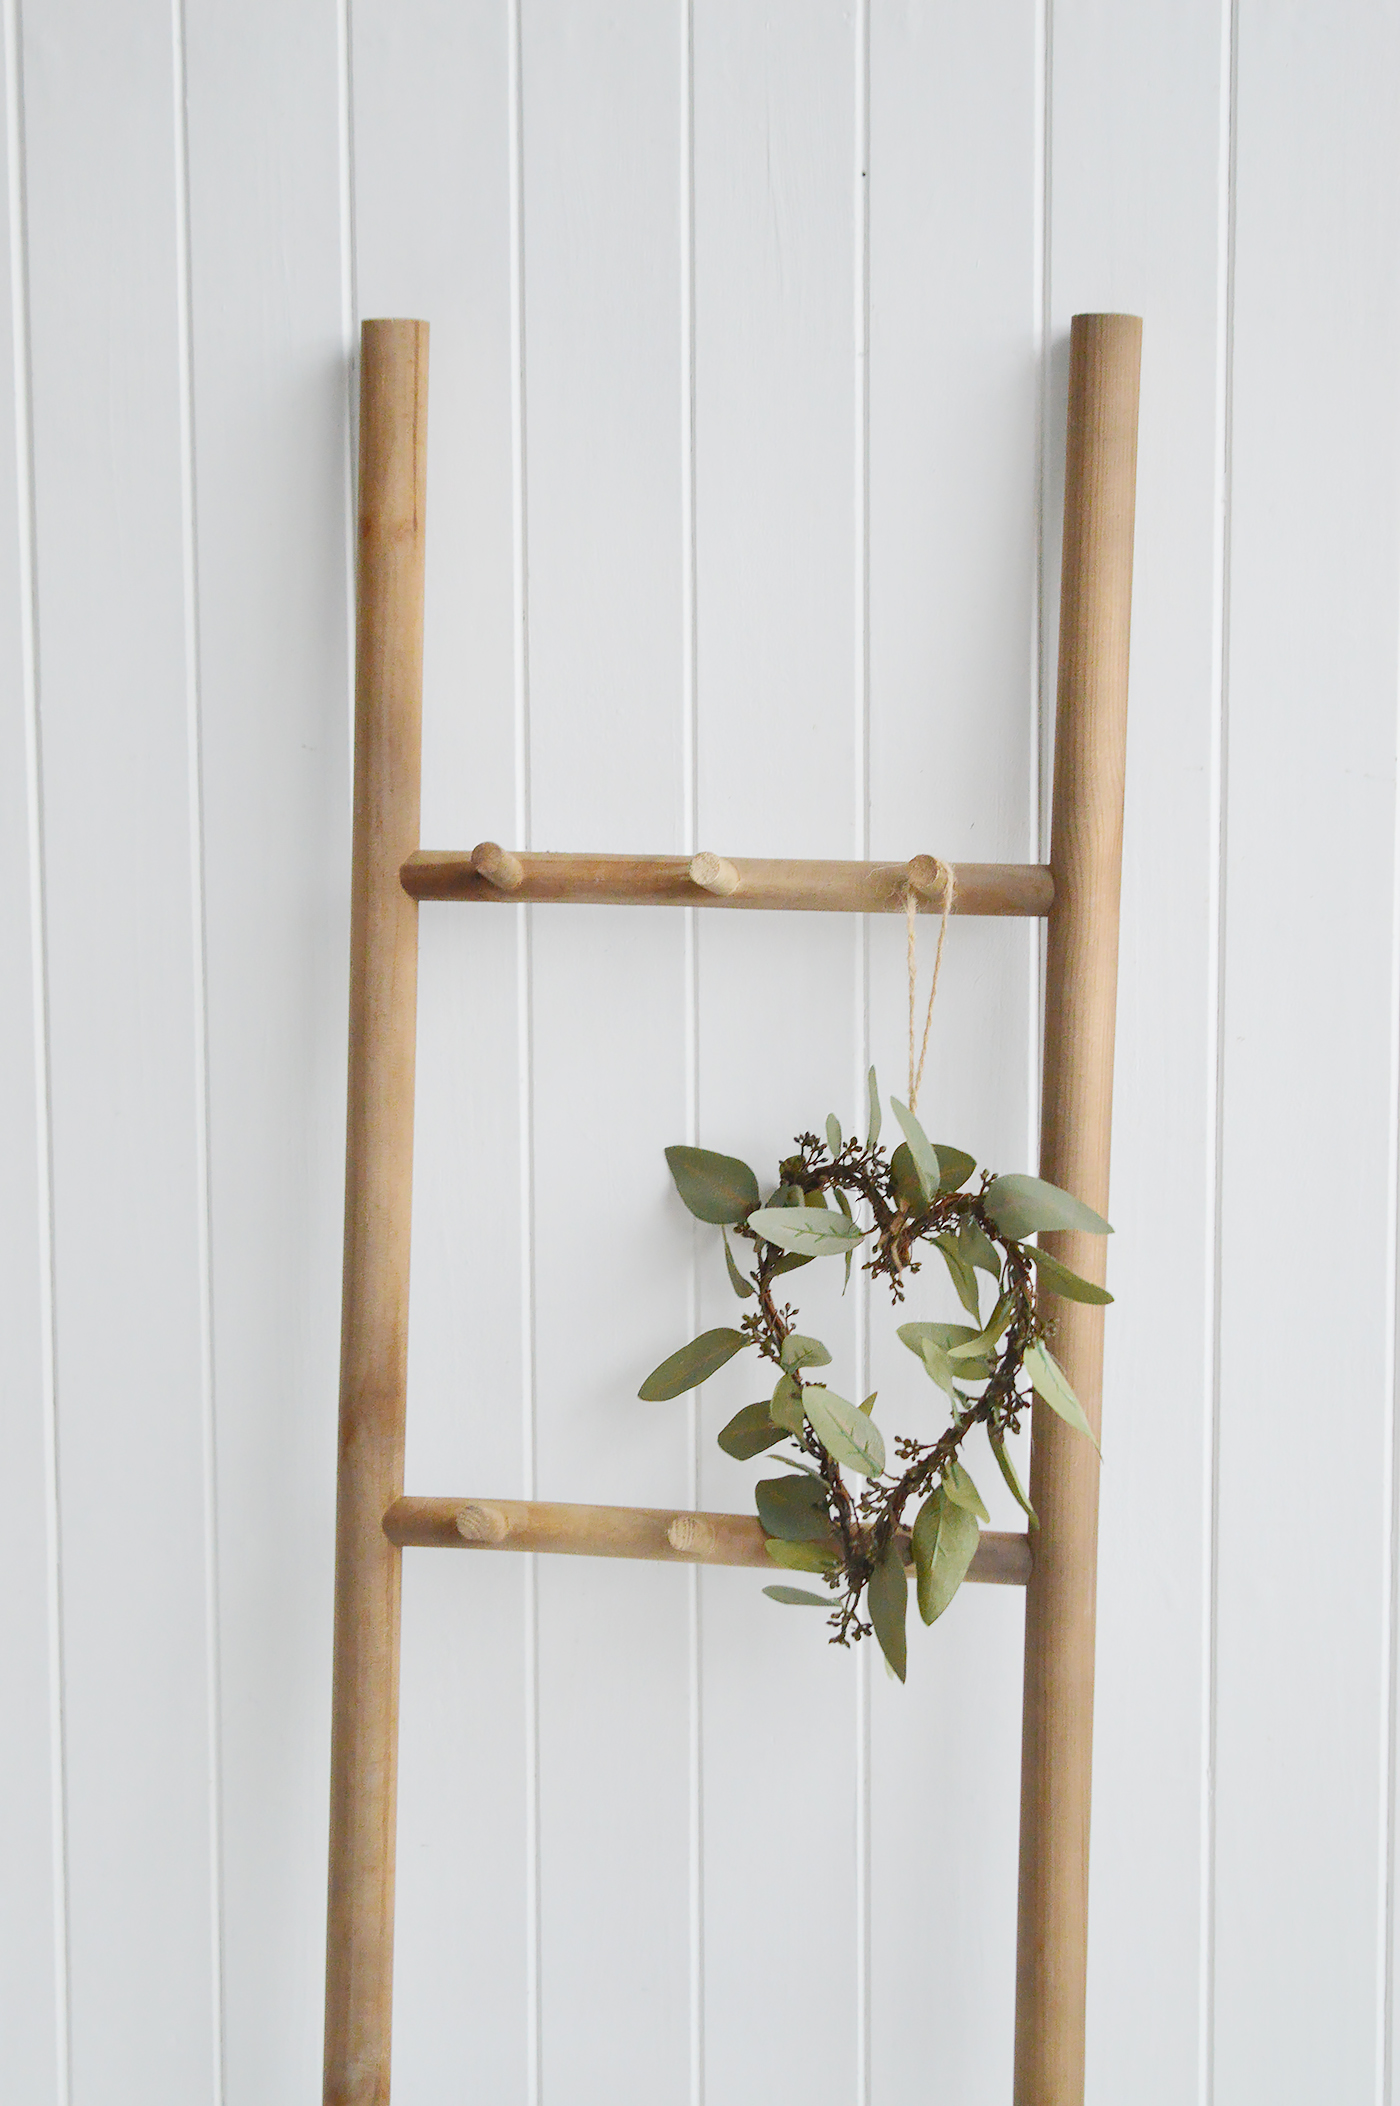 Salisbury Wooden Ladder with Pegs ladder for styling in Coastal, Country, New England and Modern Farmhouse styled home interiors